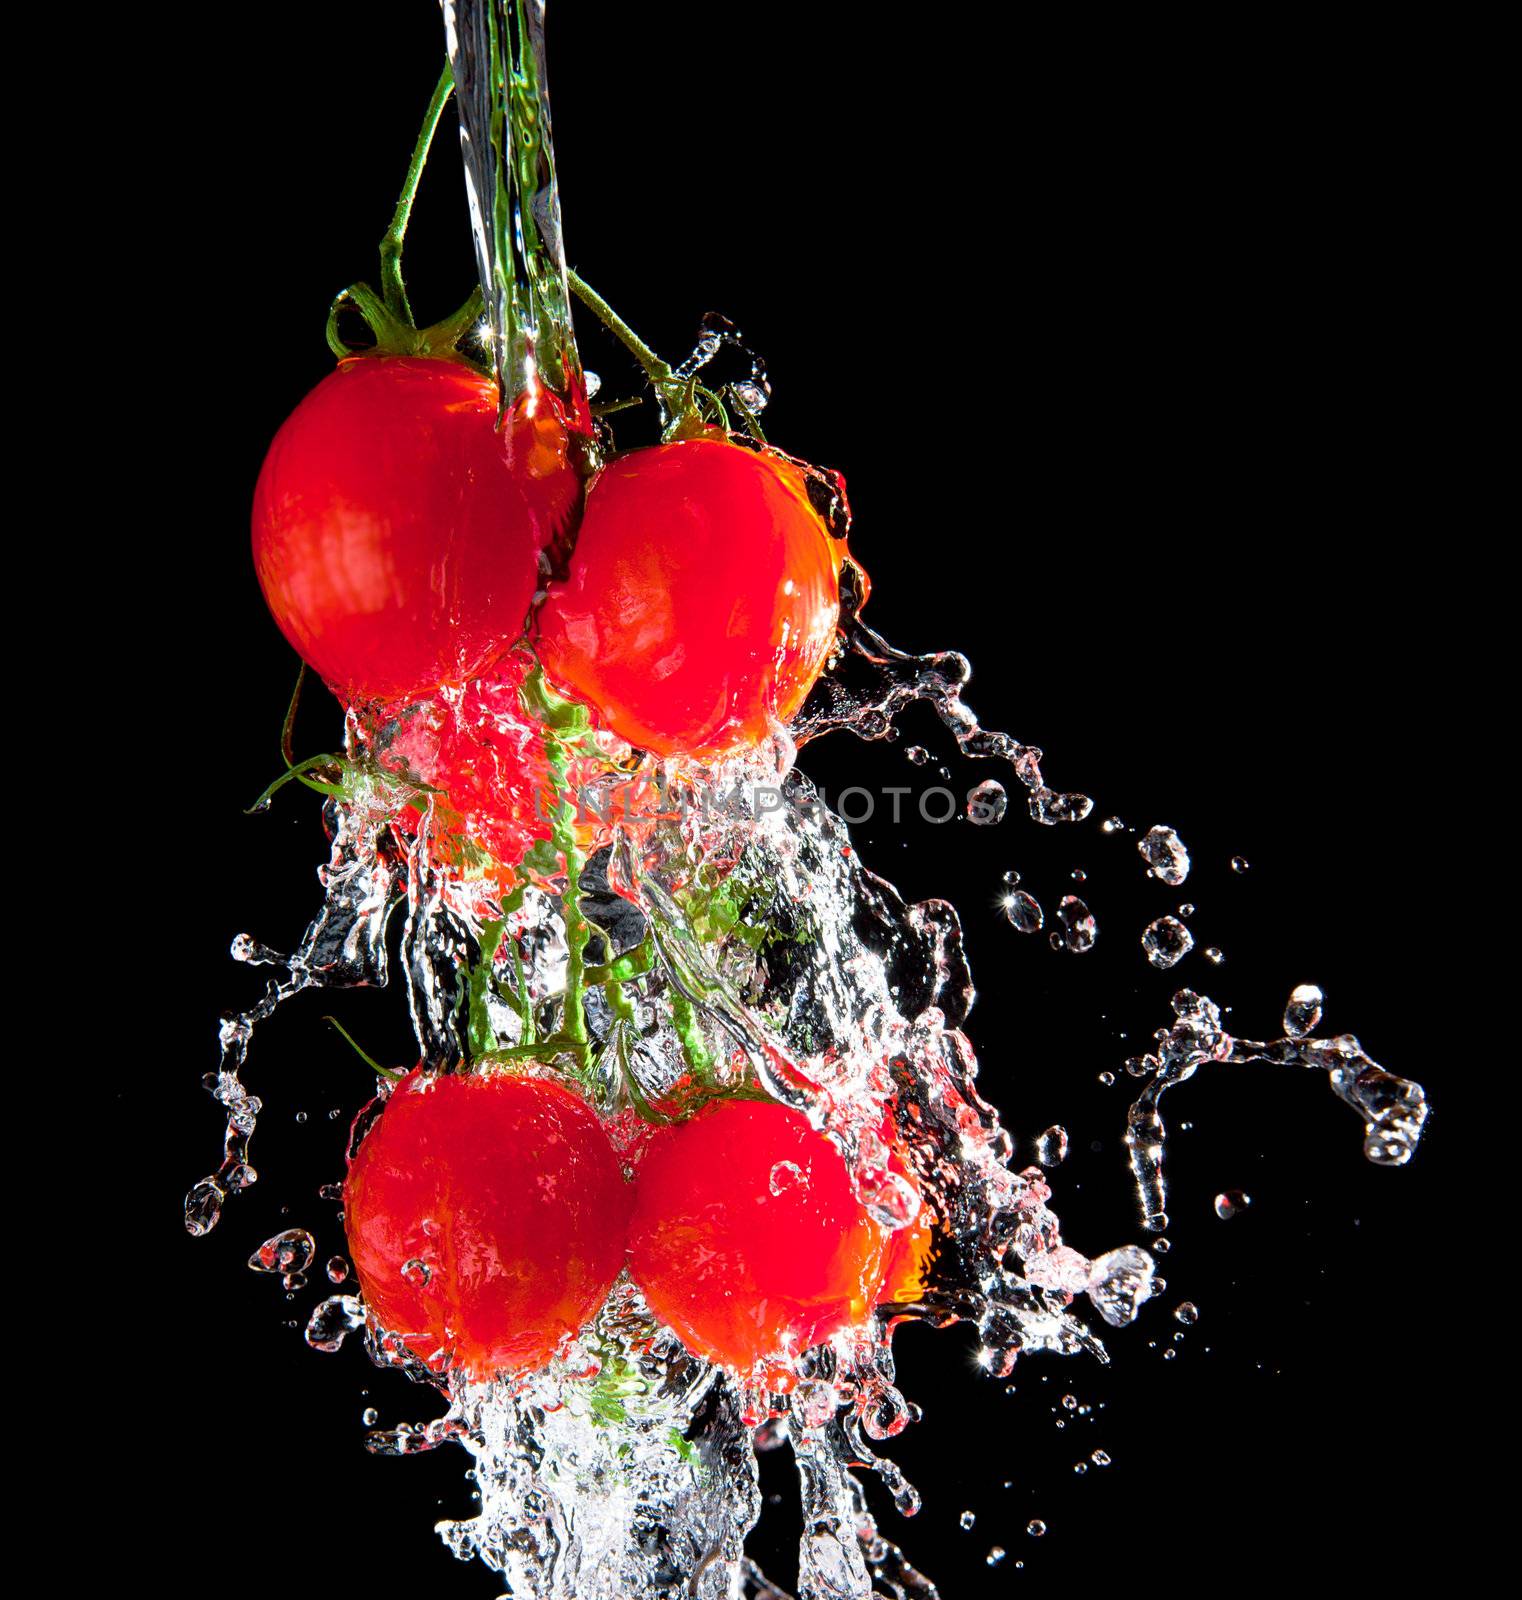 Flow of pourng water on tomato bunch isolated